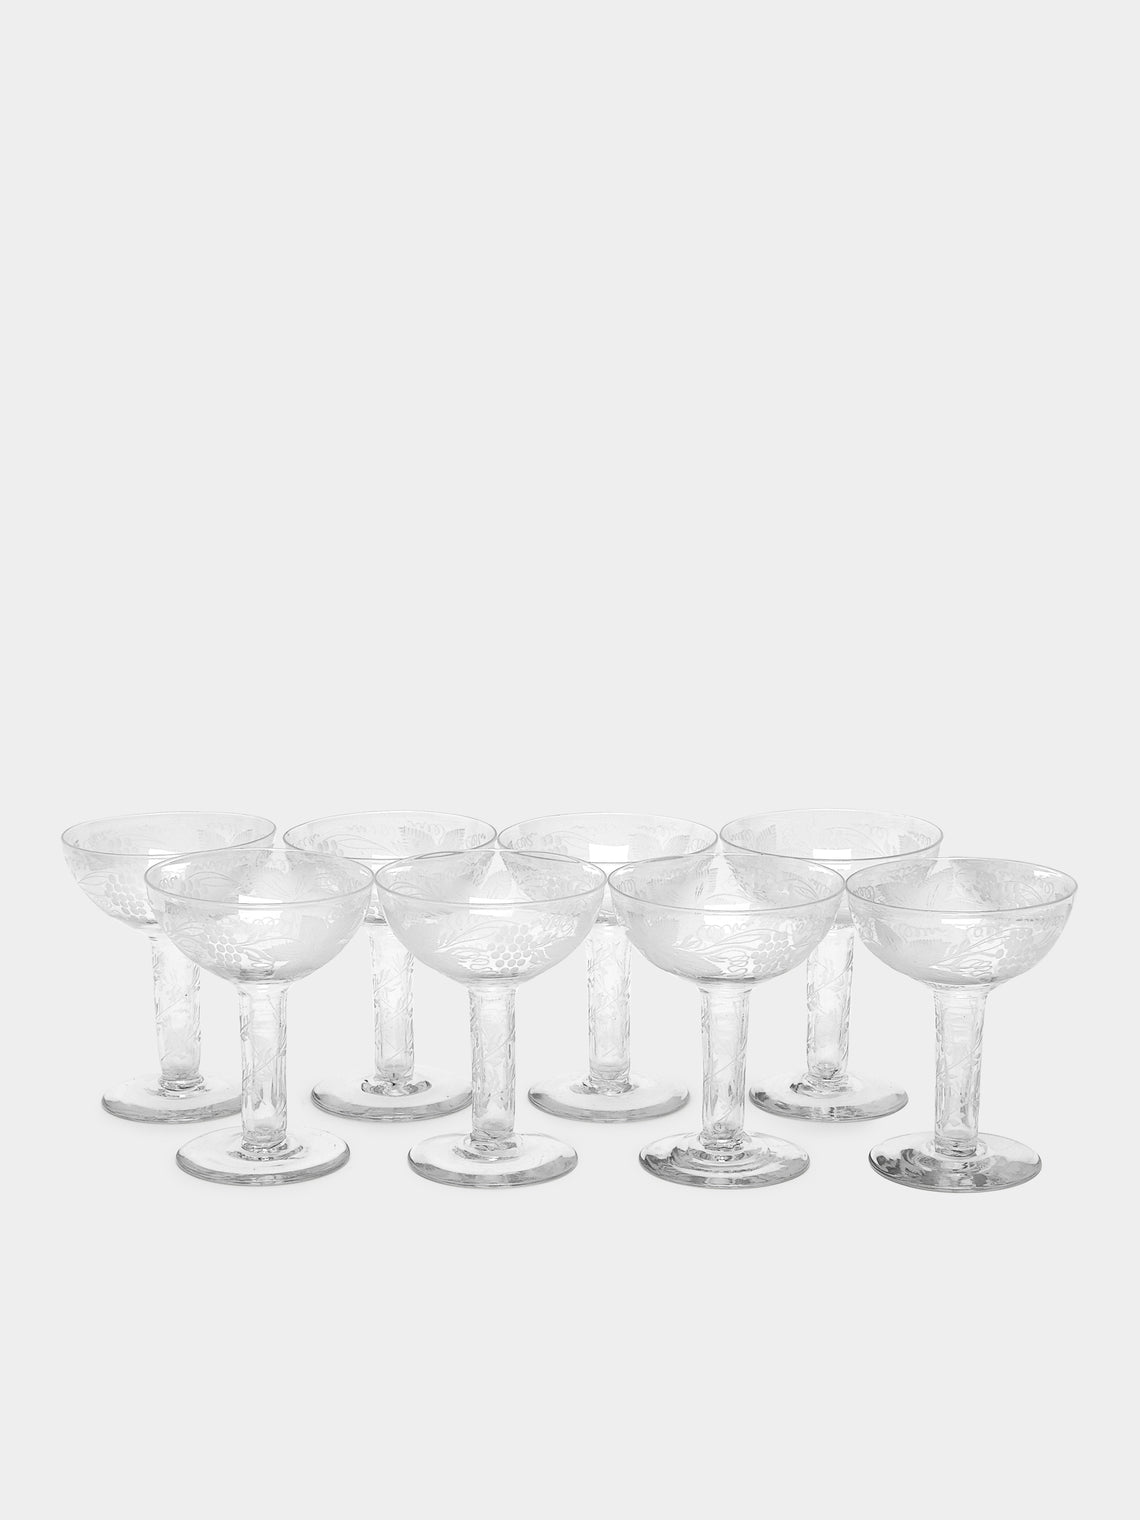 Antique and Vintage - 1830s Vine Etched Hollow Stem Champagne Coupe (Set of 8) -  - ABASK